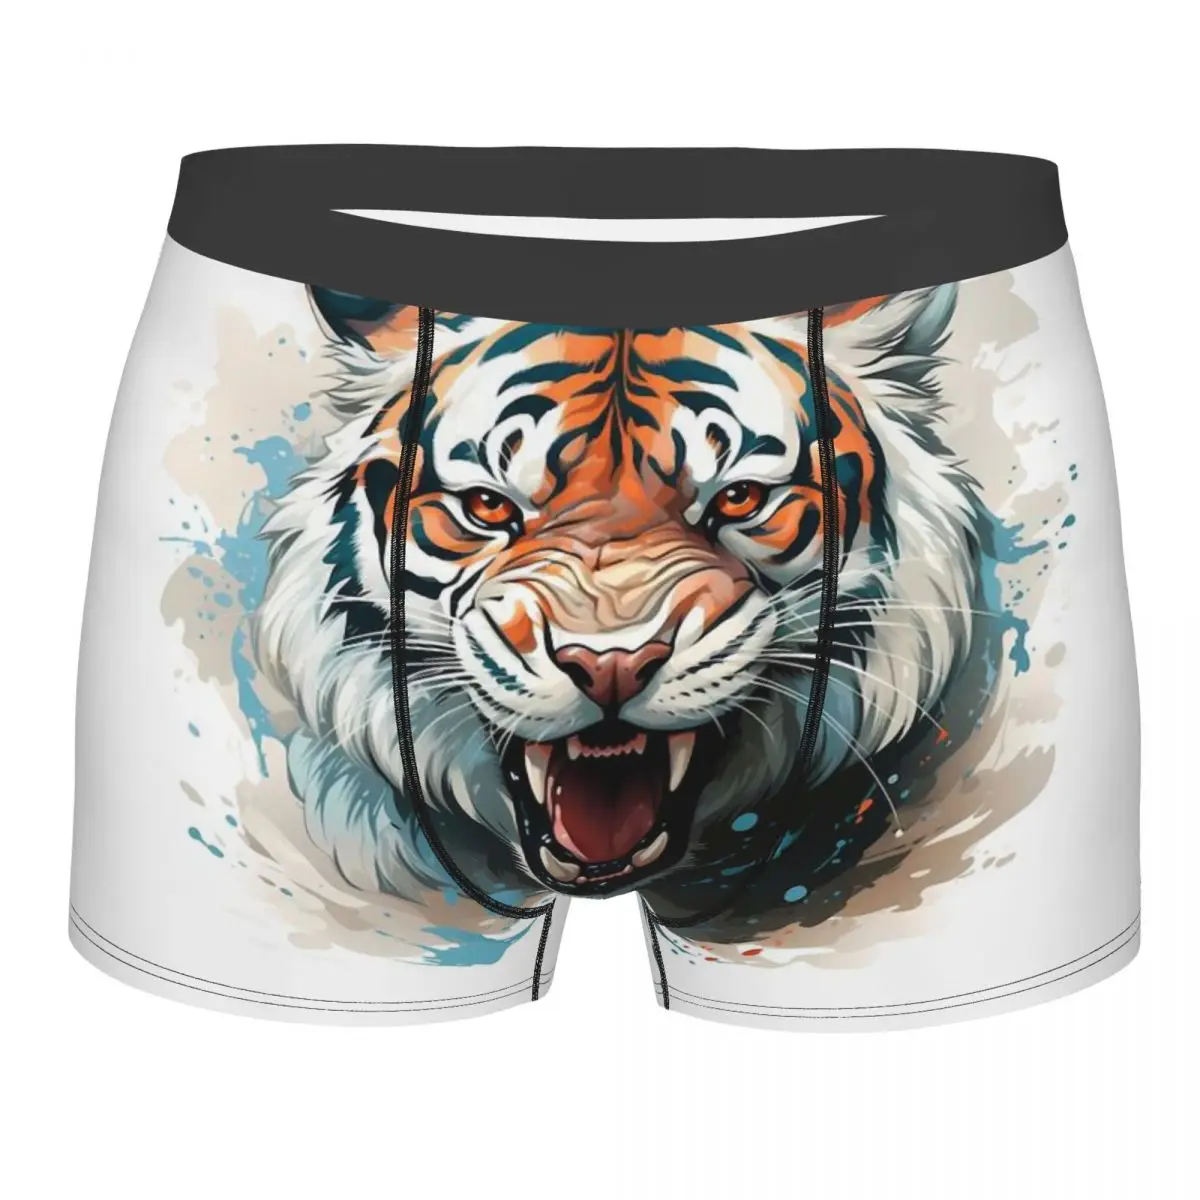 Cool Animals, Lions, Tigers, Mencosy Boxer Briefs,3D printing Underwear, Highly Breathable Top Quality Gift Idea